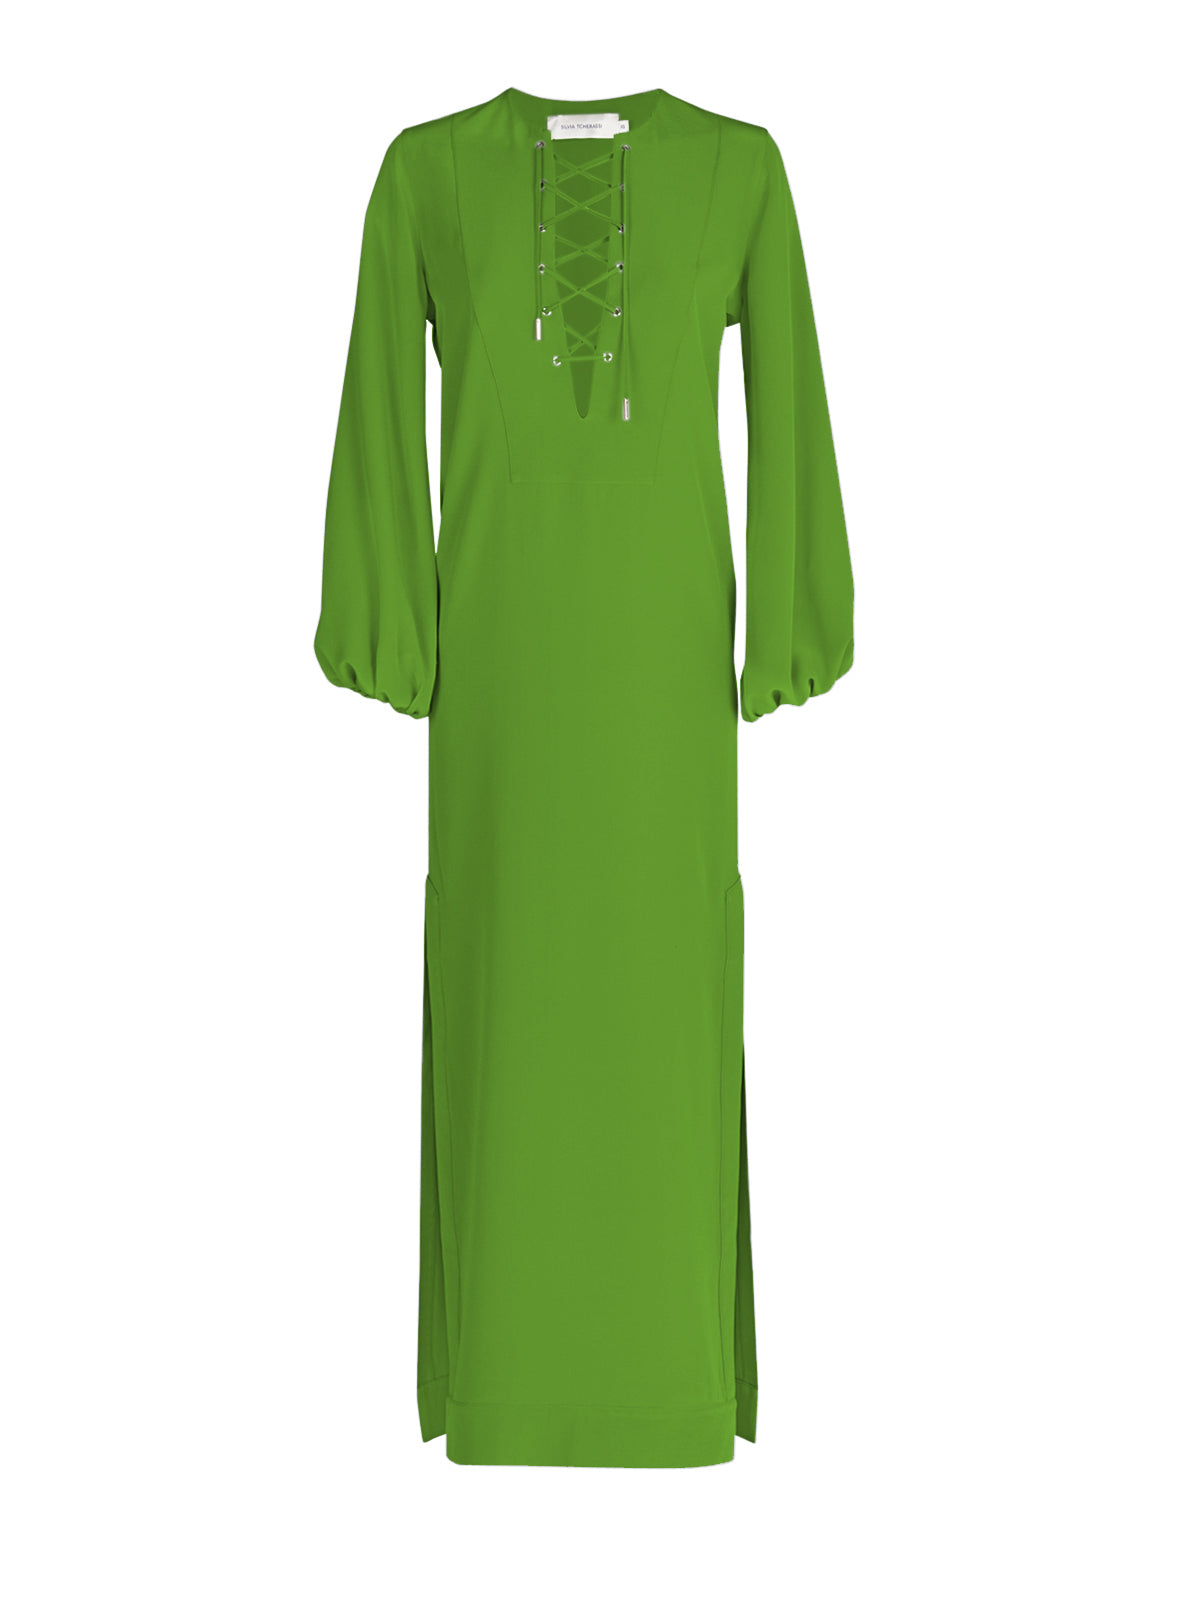 A Isernia Tunic Lime with lace detailing.